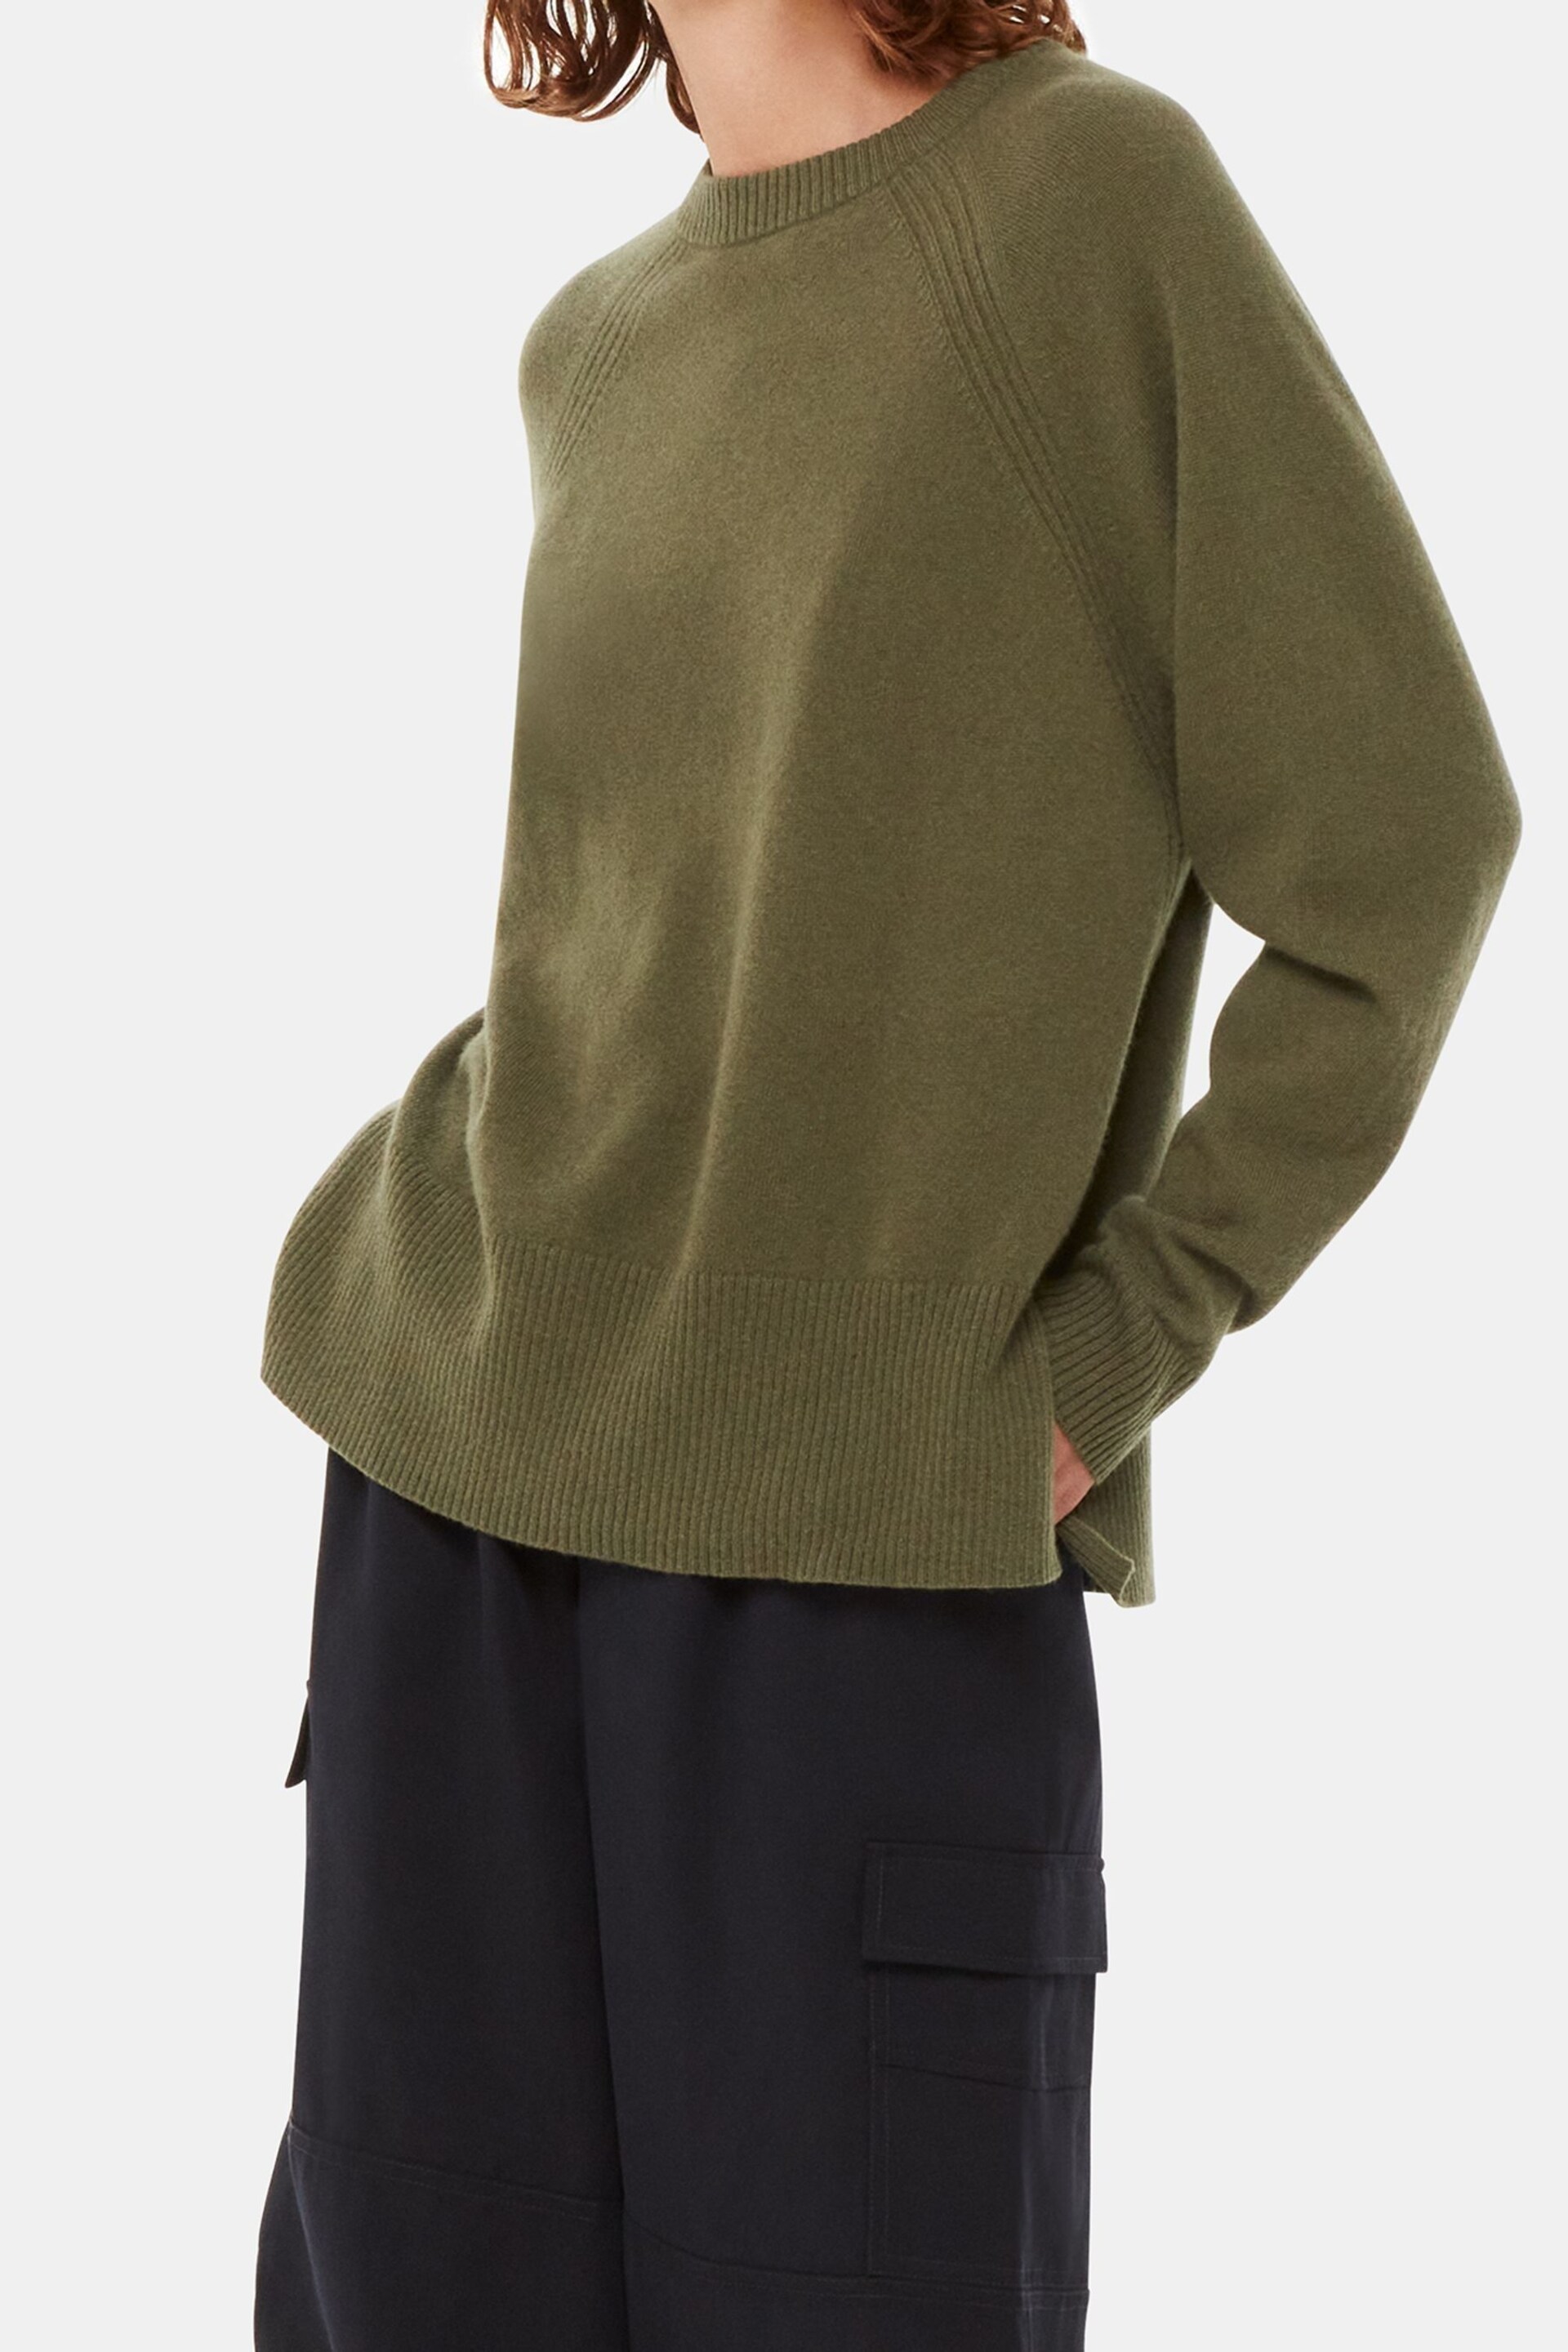 Whistles Green Ultimate Cashmere Crew Neck Jumper - Image 4 of 5